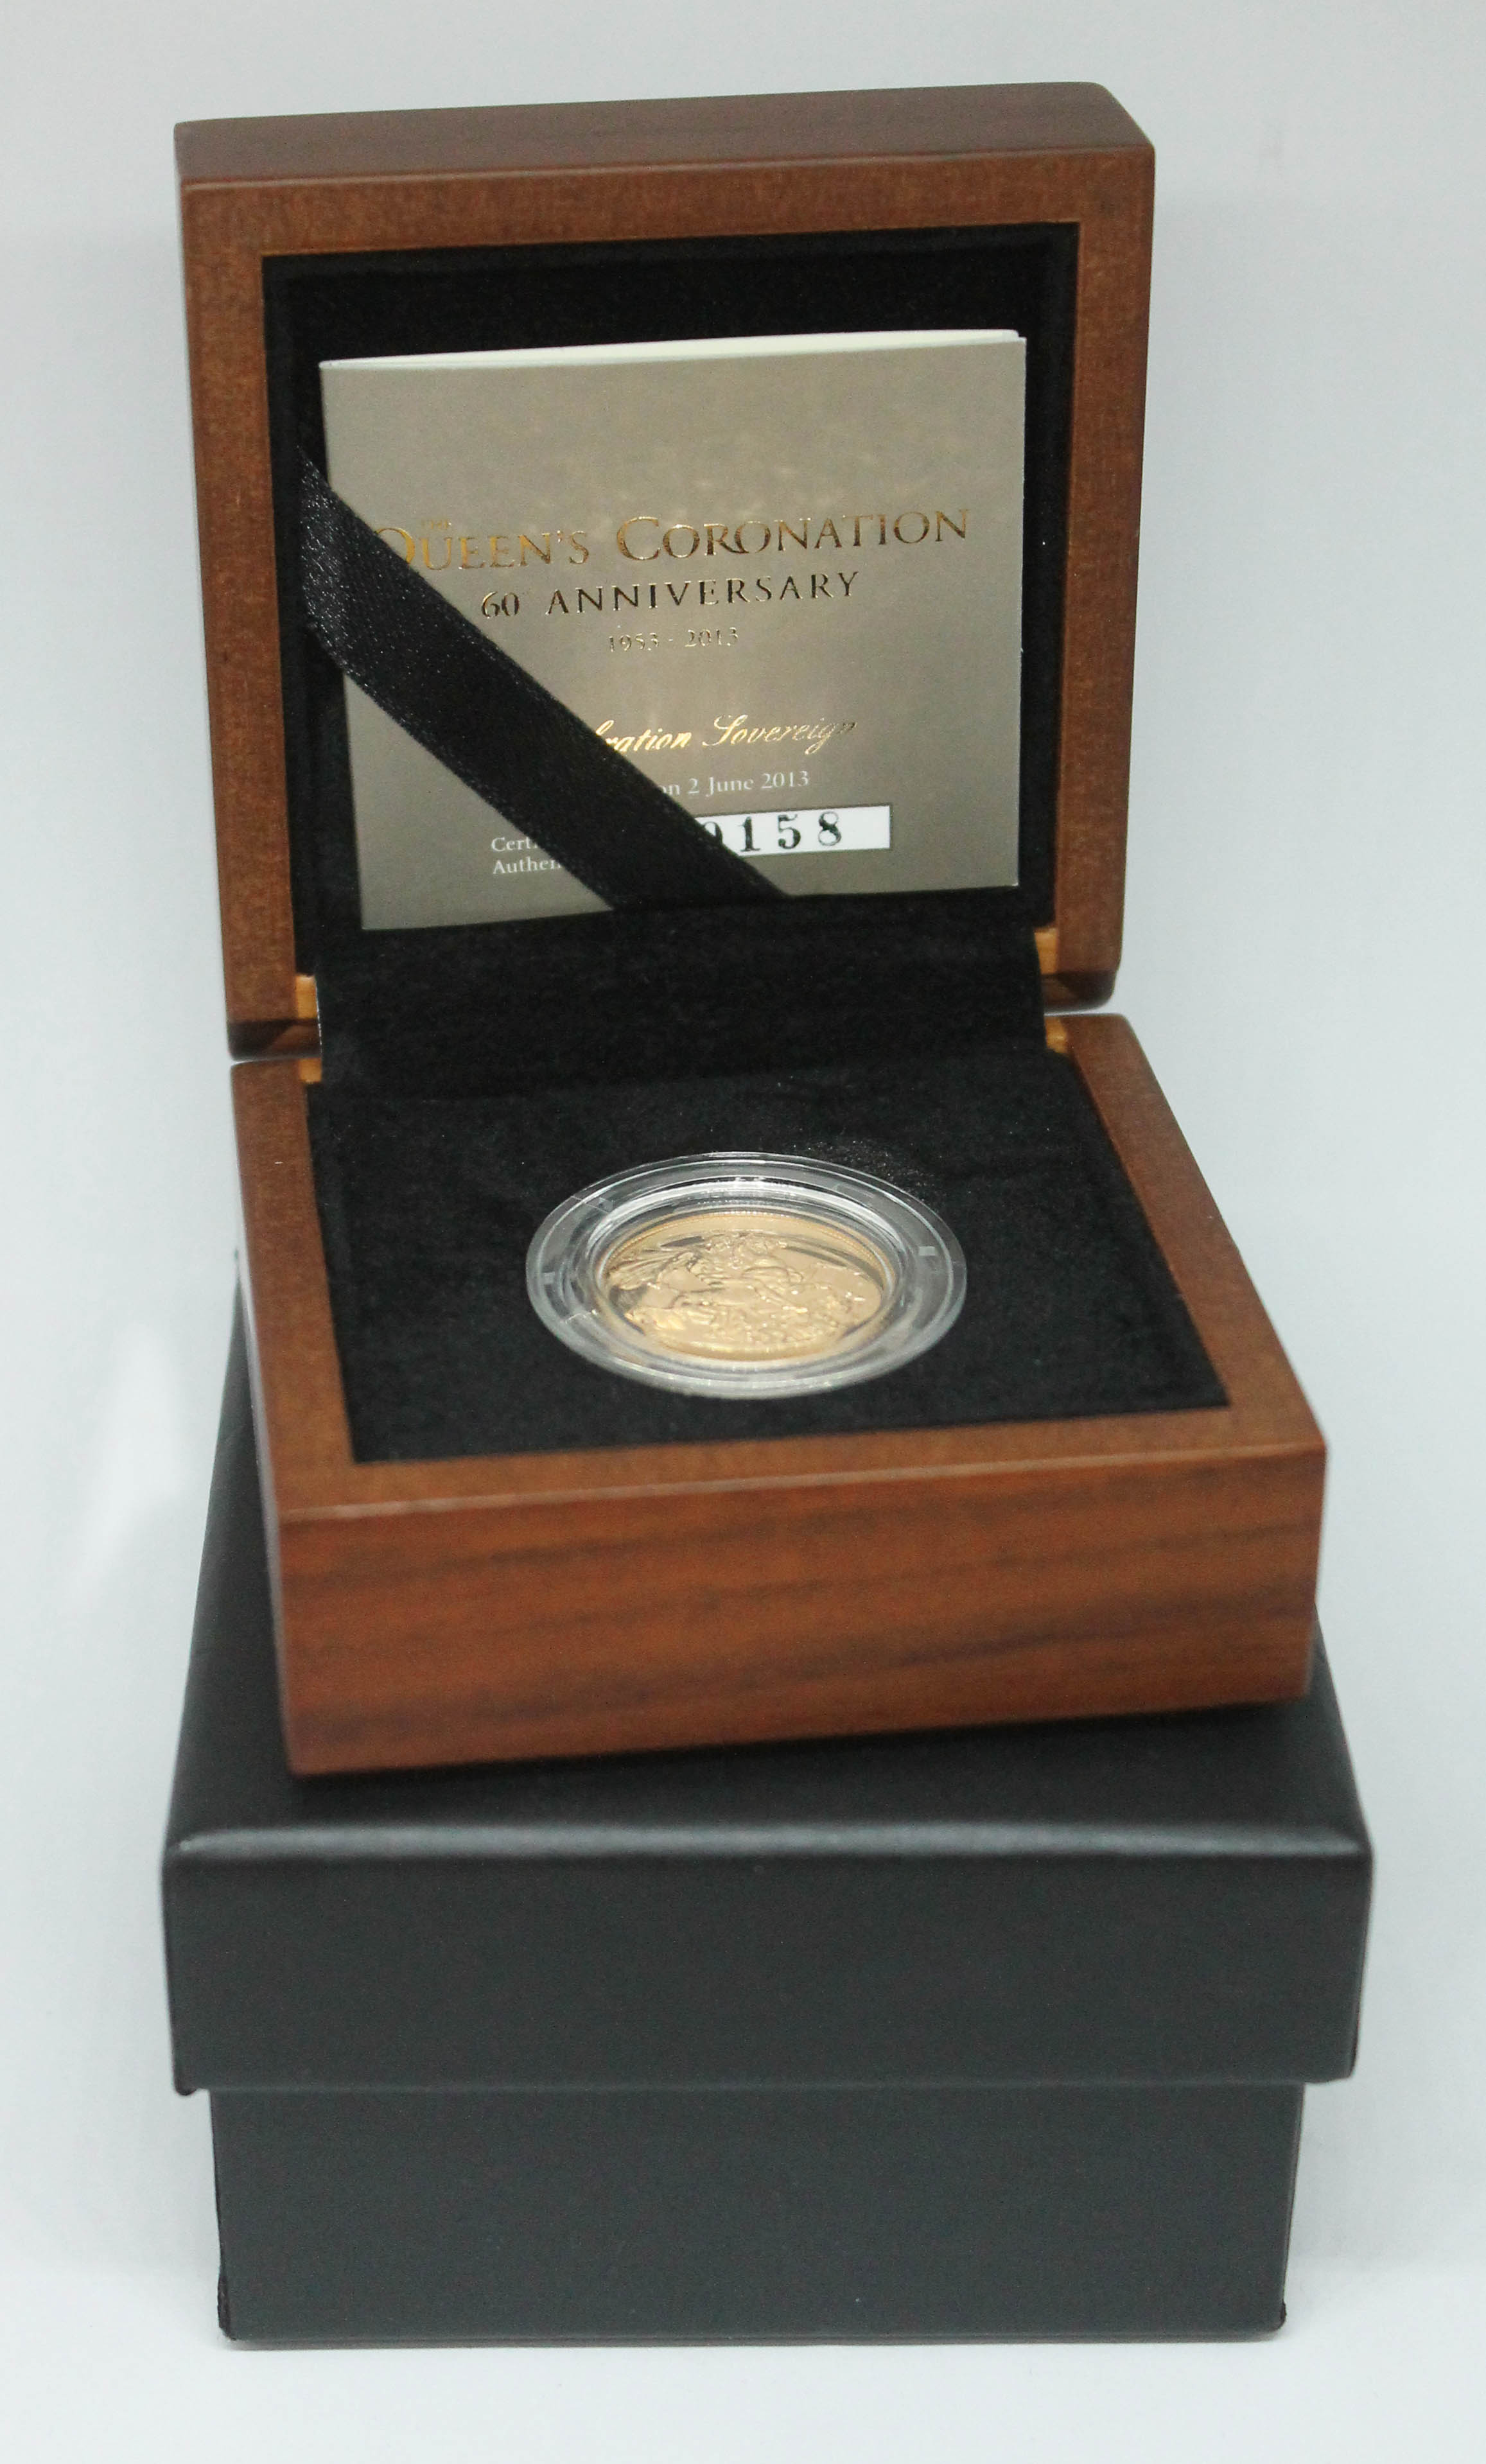 Elizabeth II Royal Mint Queen's Coronation 60th Anniversary 2018 sovereign, boxed with certificate.